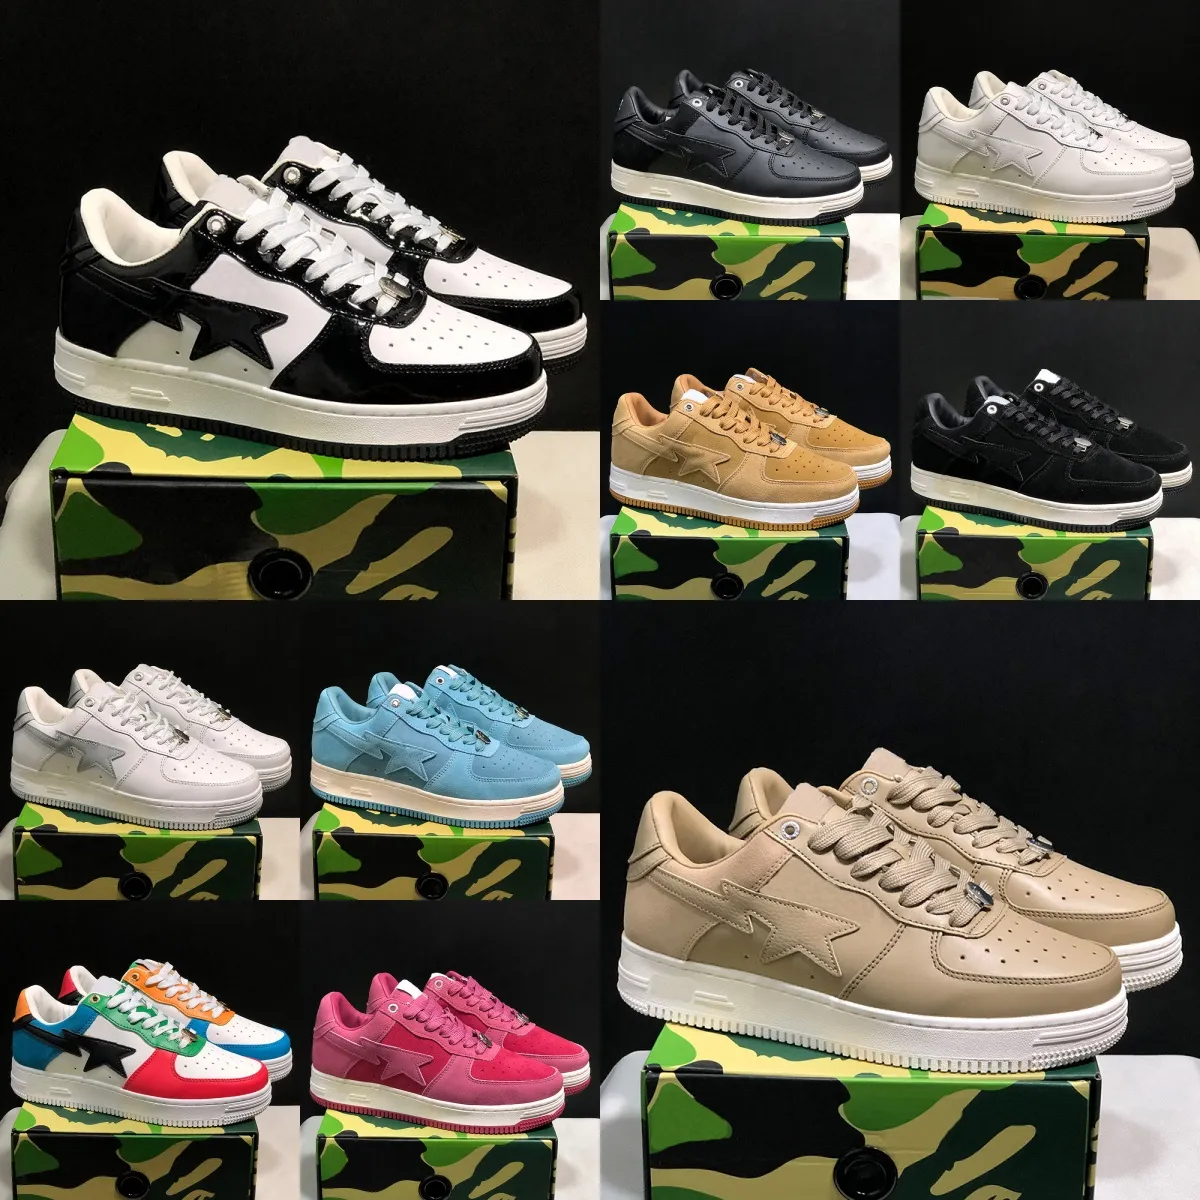 Casual Designer Shoes Men Women Low Patent Leather Camouflage Skateboarding Jogging Trainers Sneakers Lace-Up Unisex Size 36-45